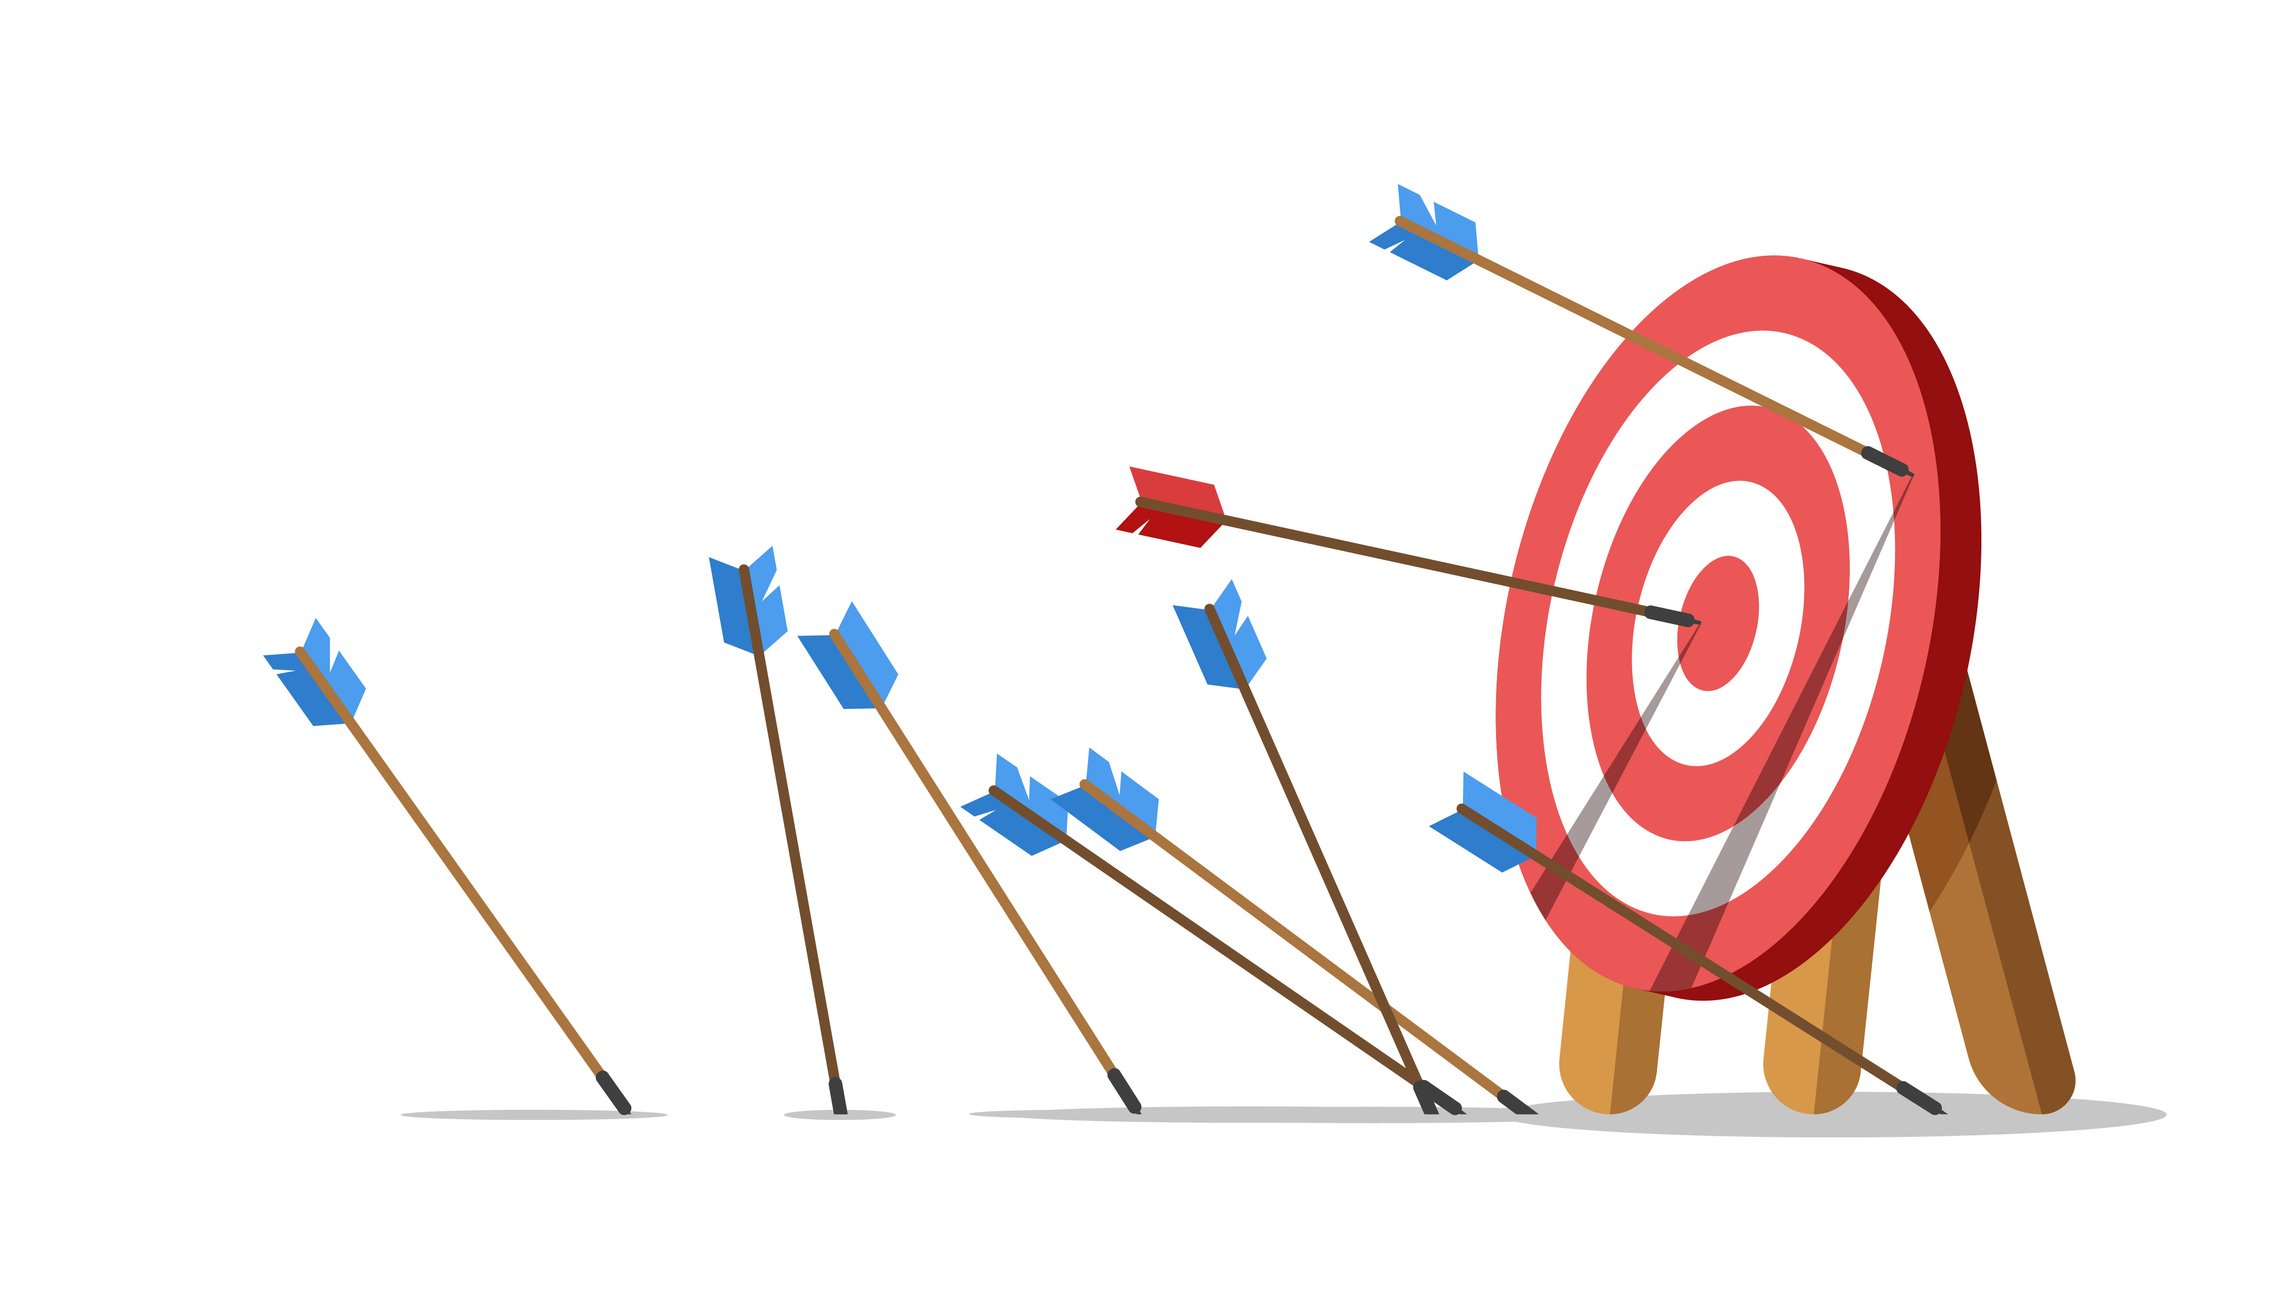 Graphic of a number of arrows missing the bullseye on a target except for one arrow